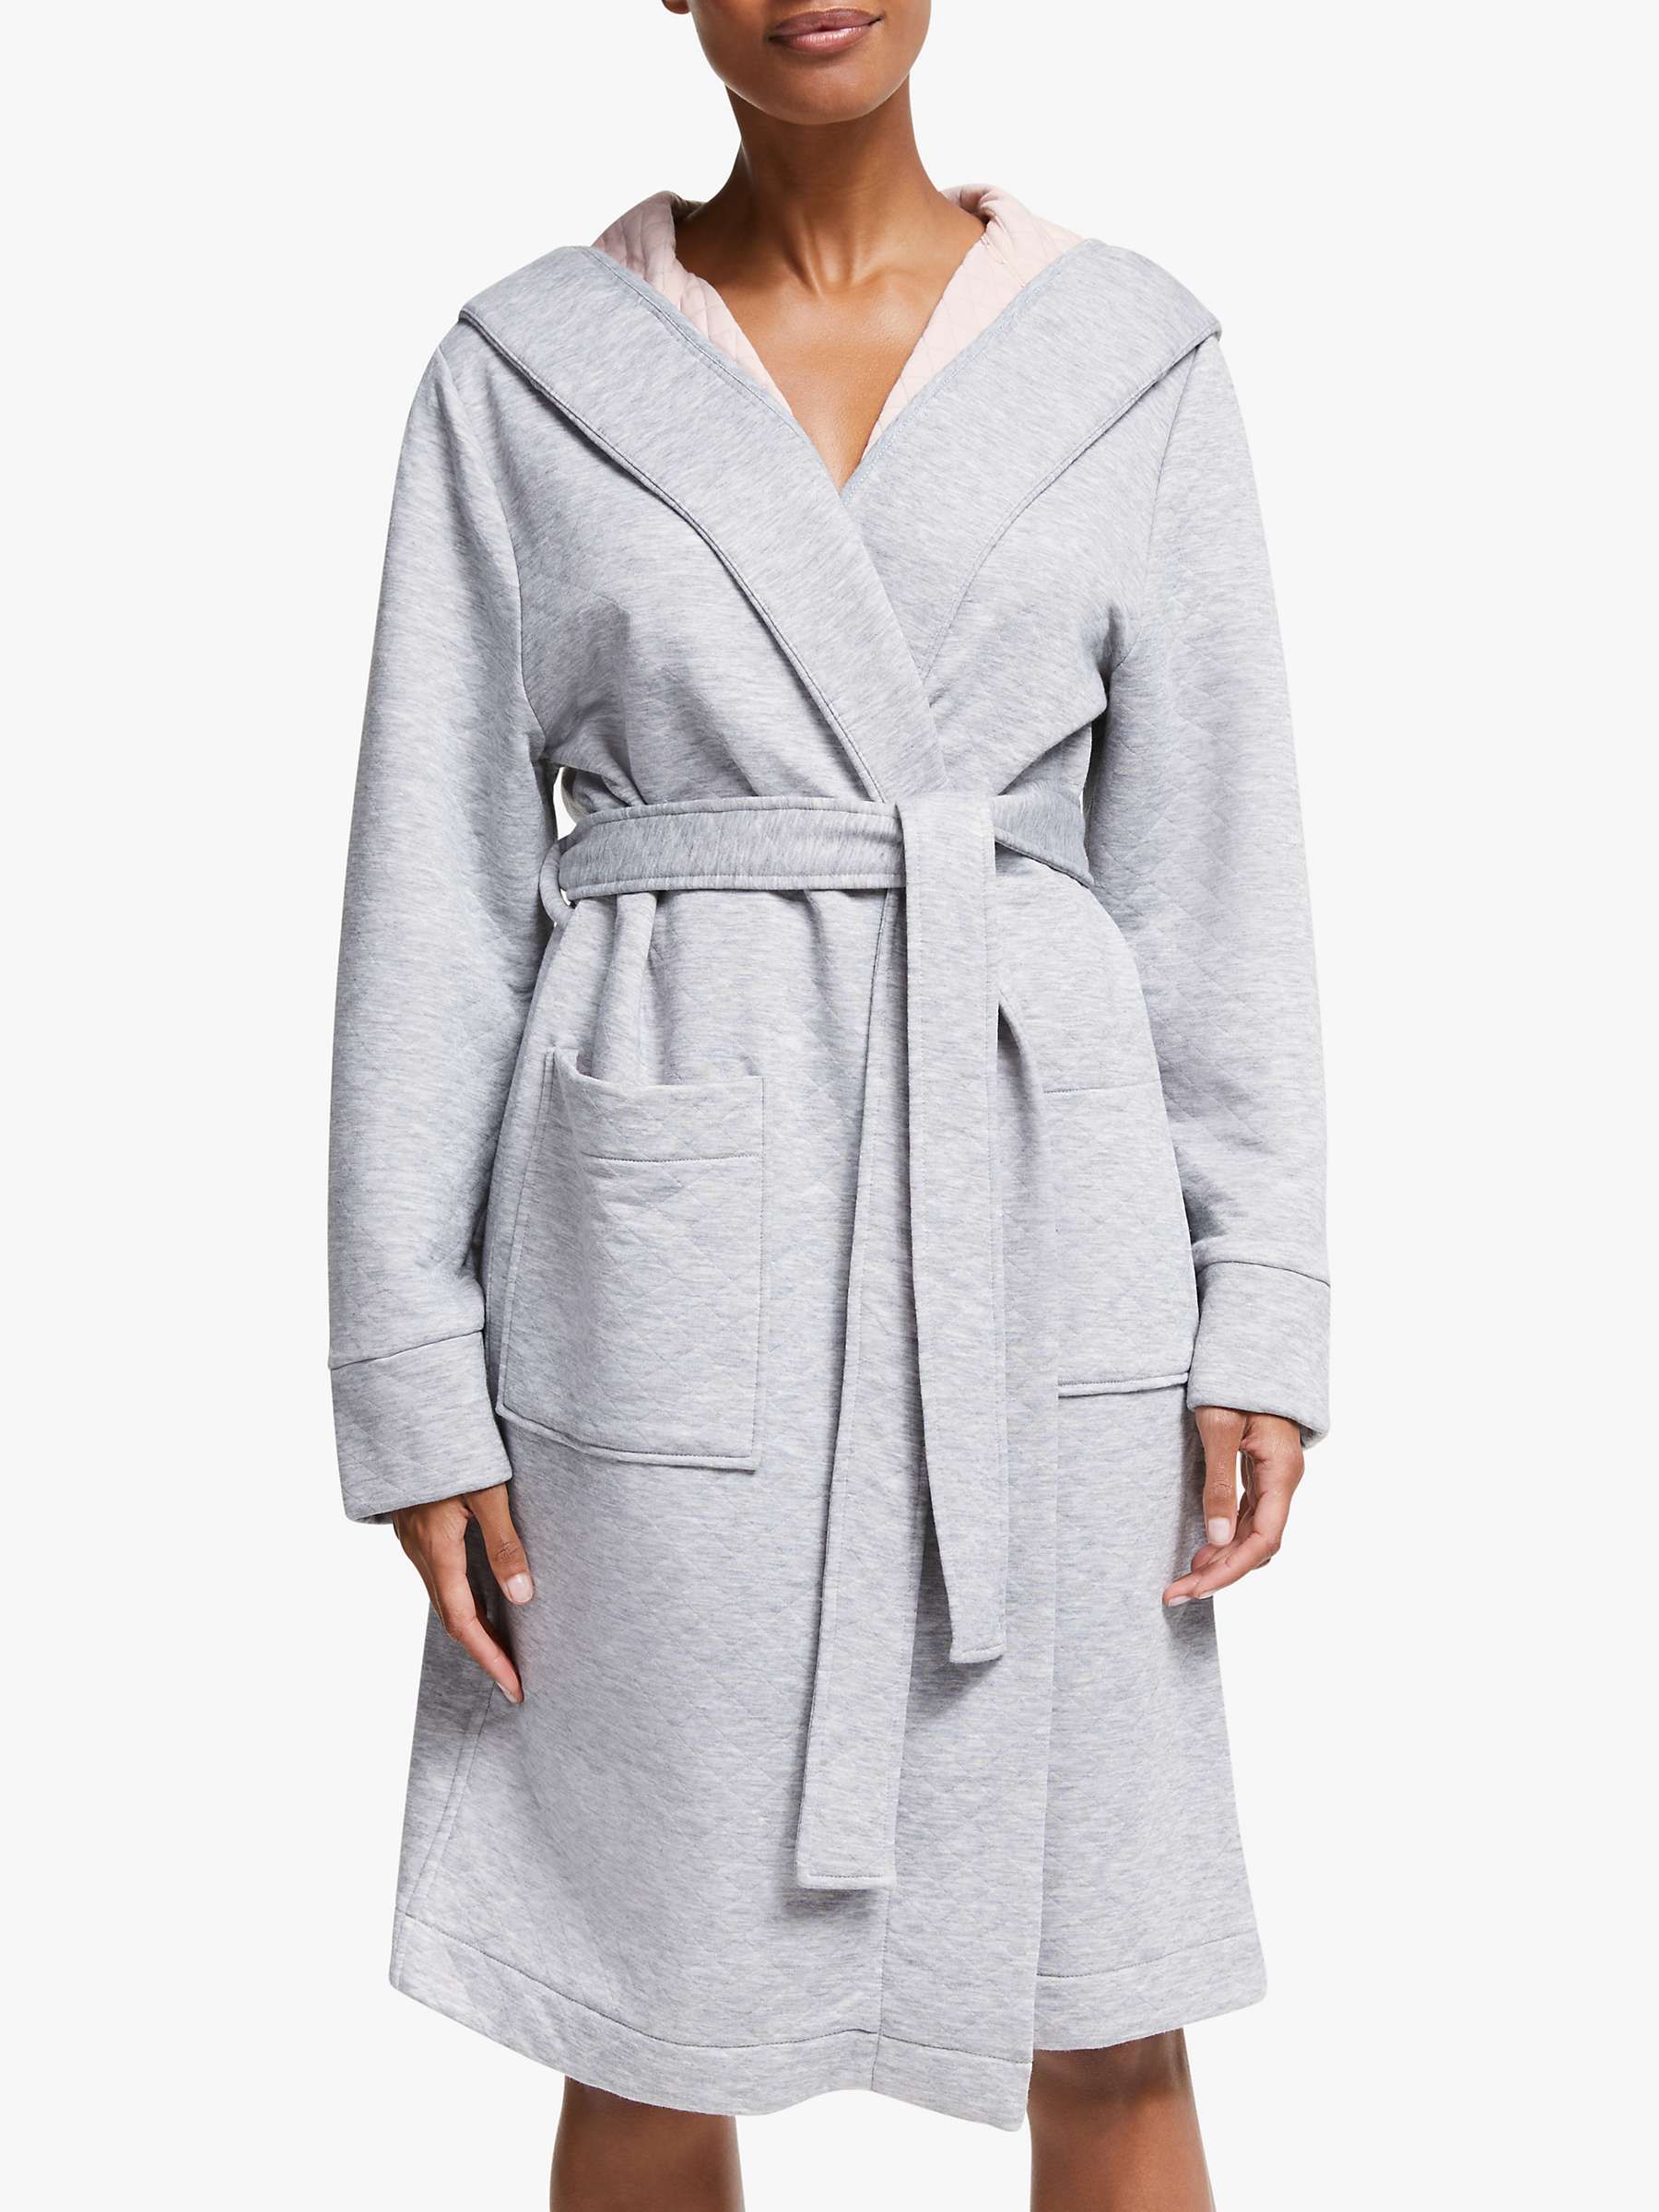 next sale dressing gown